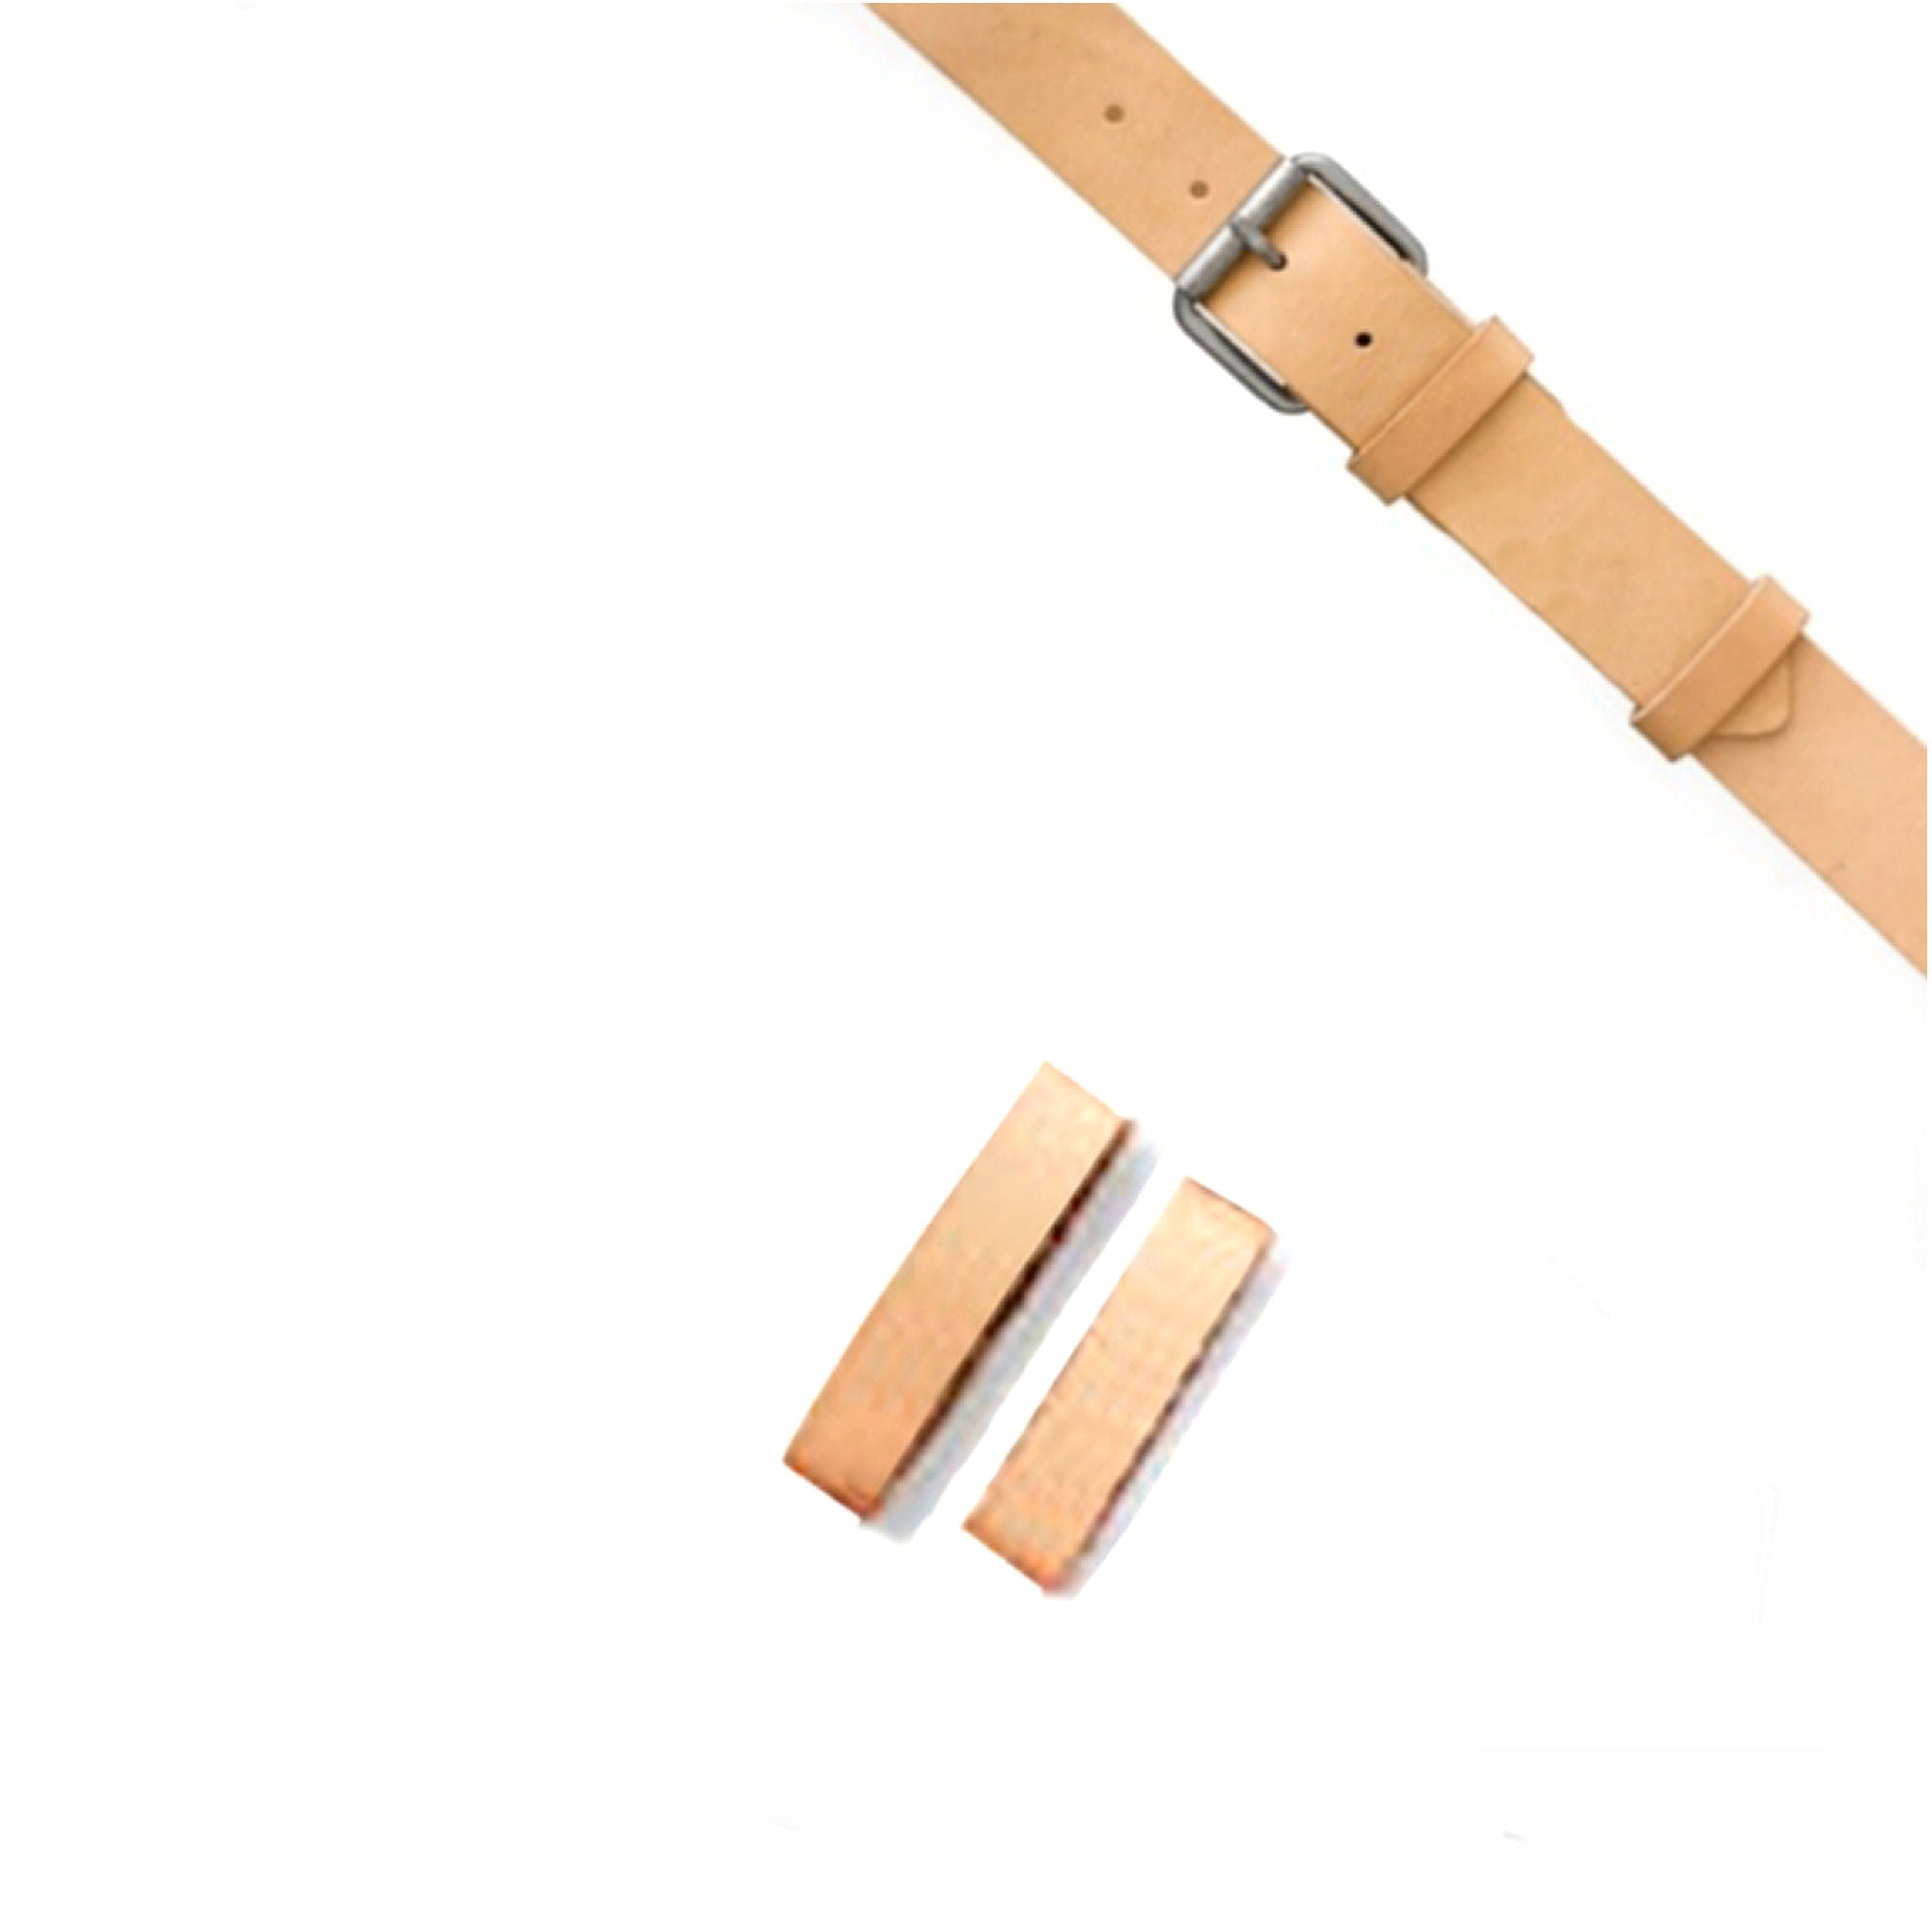 51mm Natural Veg Tan Leather Strap or Belt Keepers